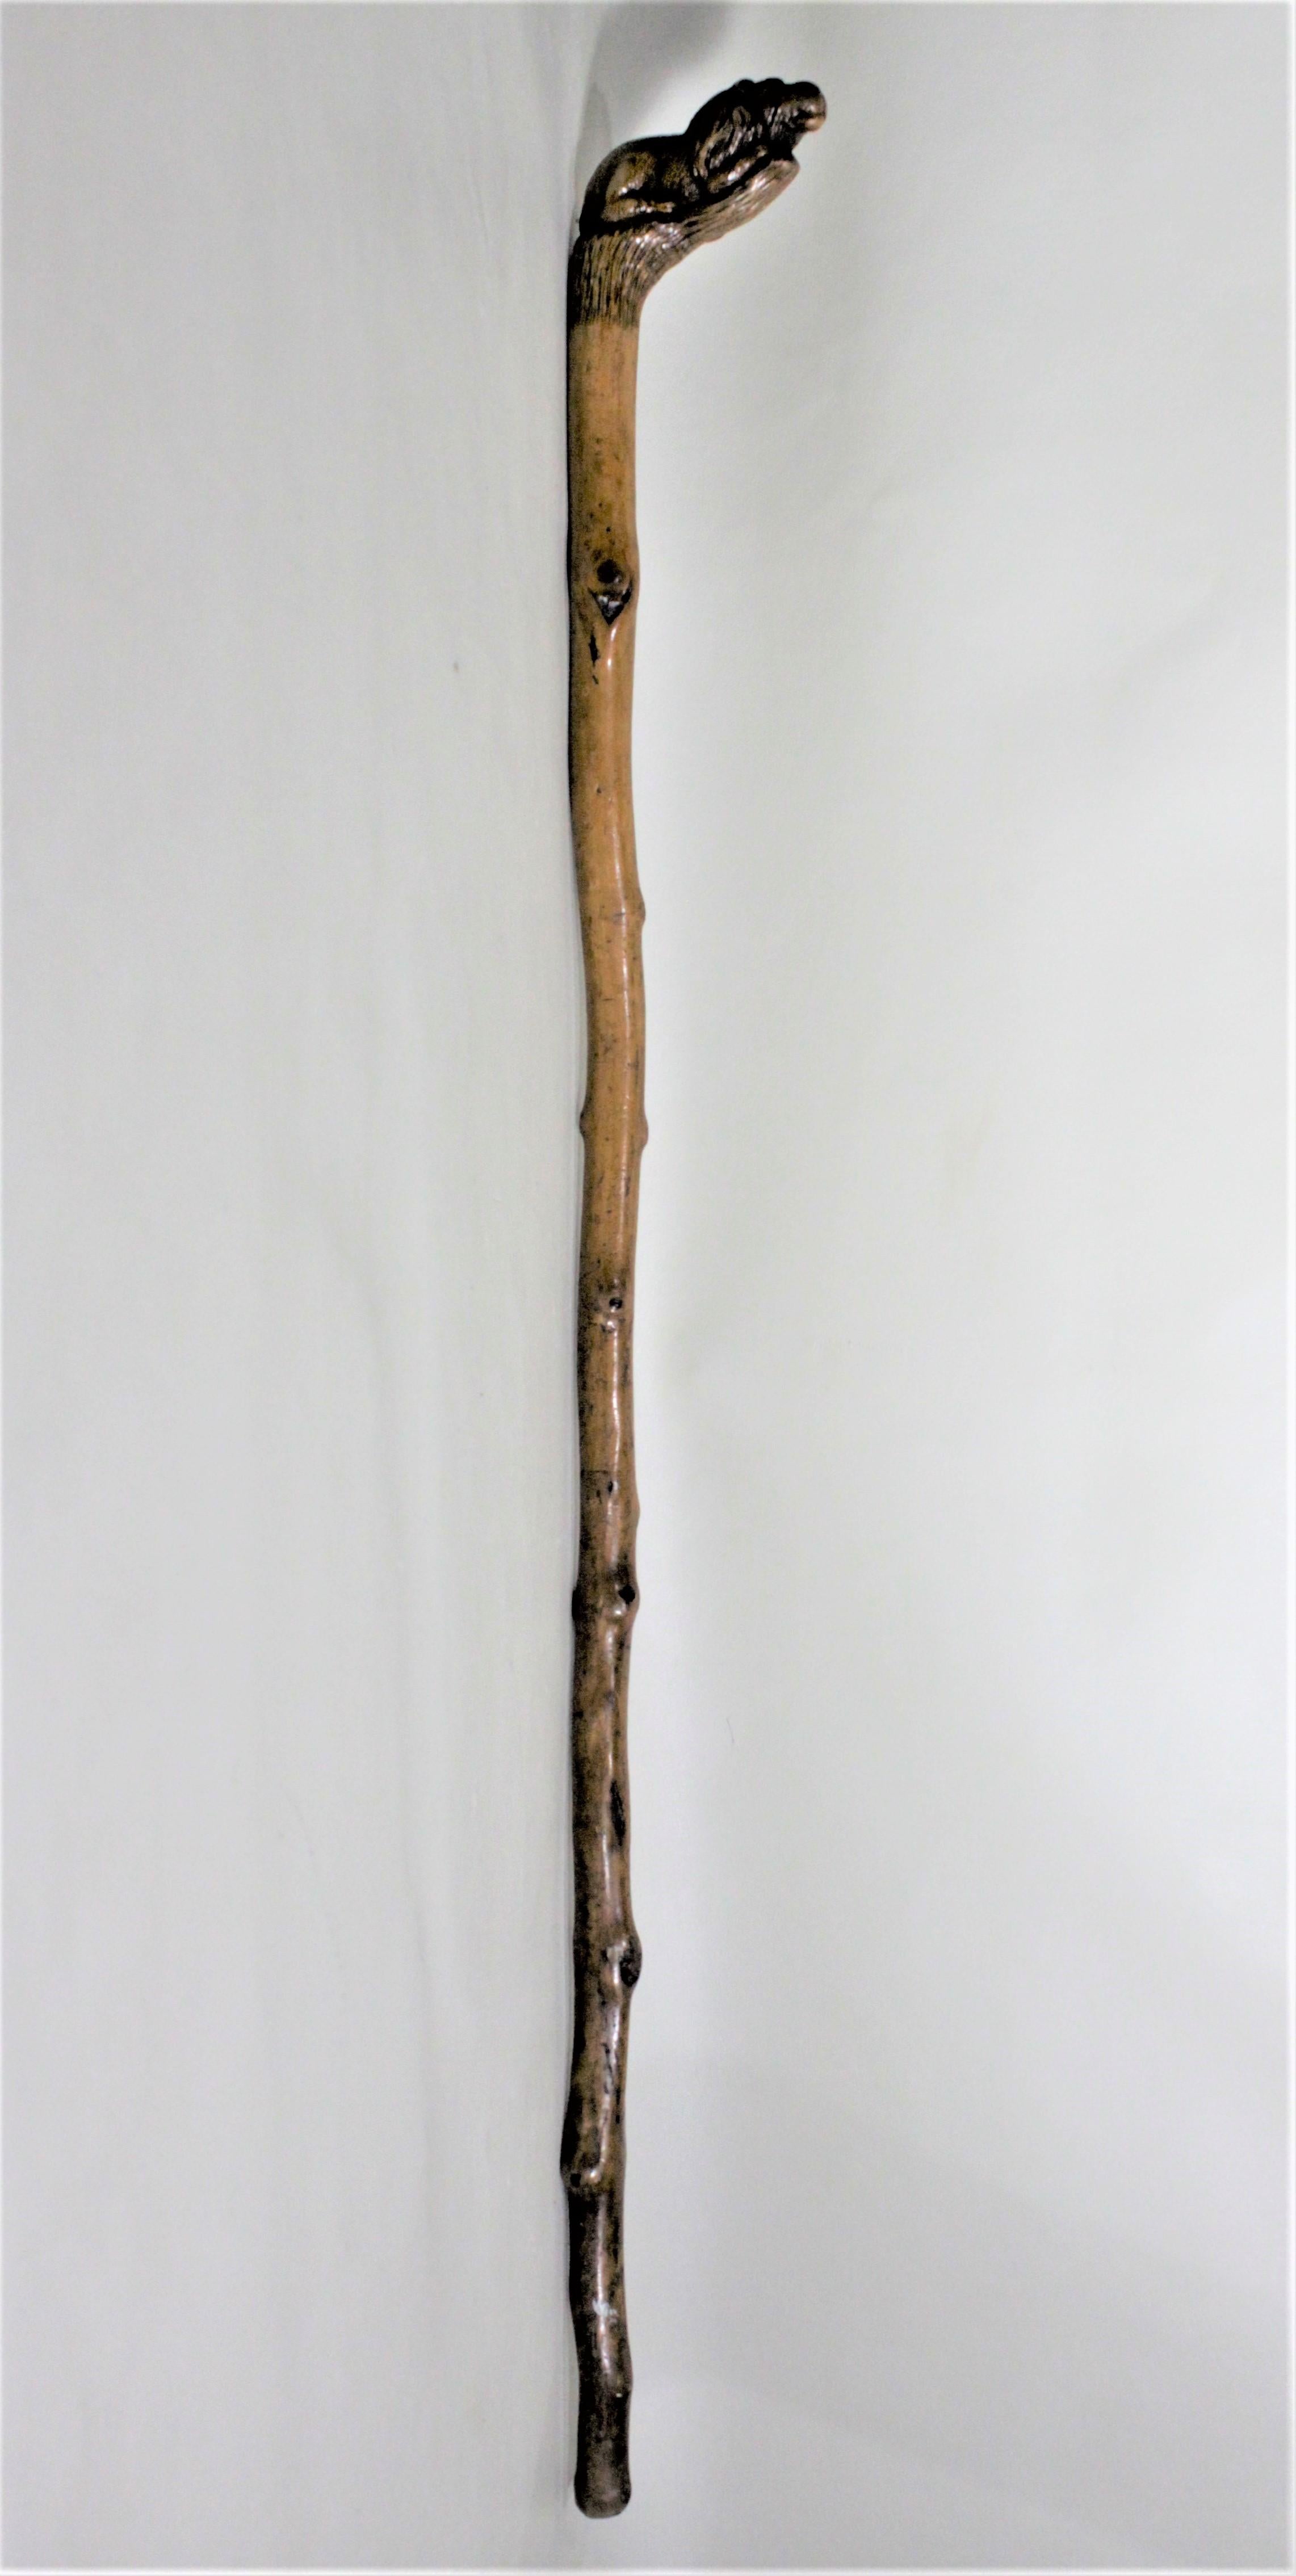 This antique Folk Art hand carved cane is unsigned, but believed to have originated from England in circa 1900. The handle is a hand carved rendering of a seated male lion, and quite detailed from all angles and transitions nicely into the cane